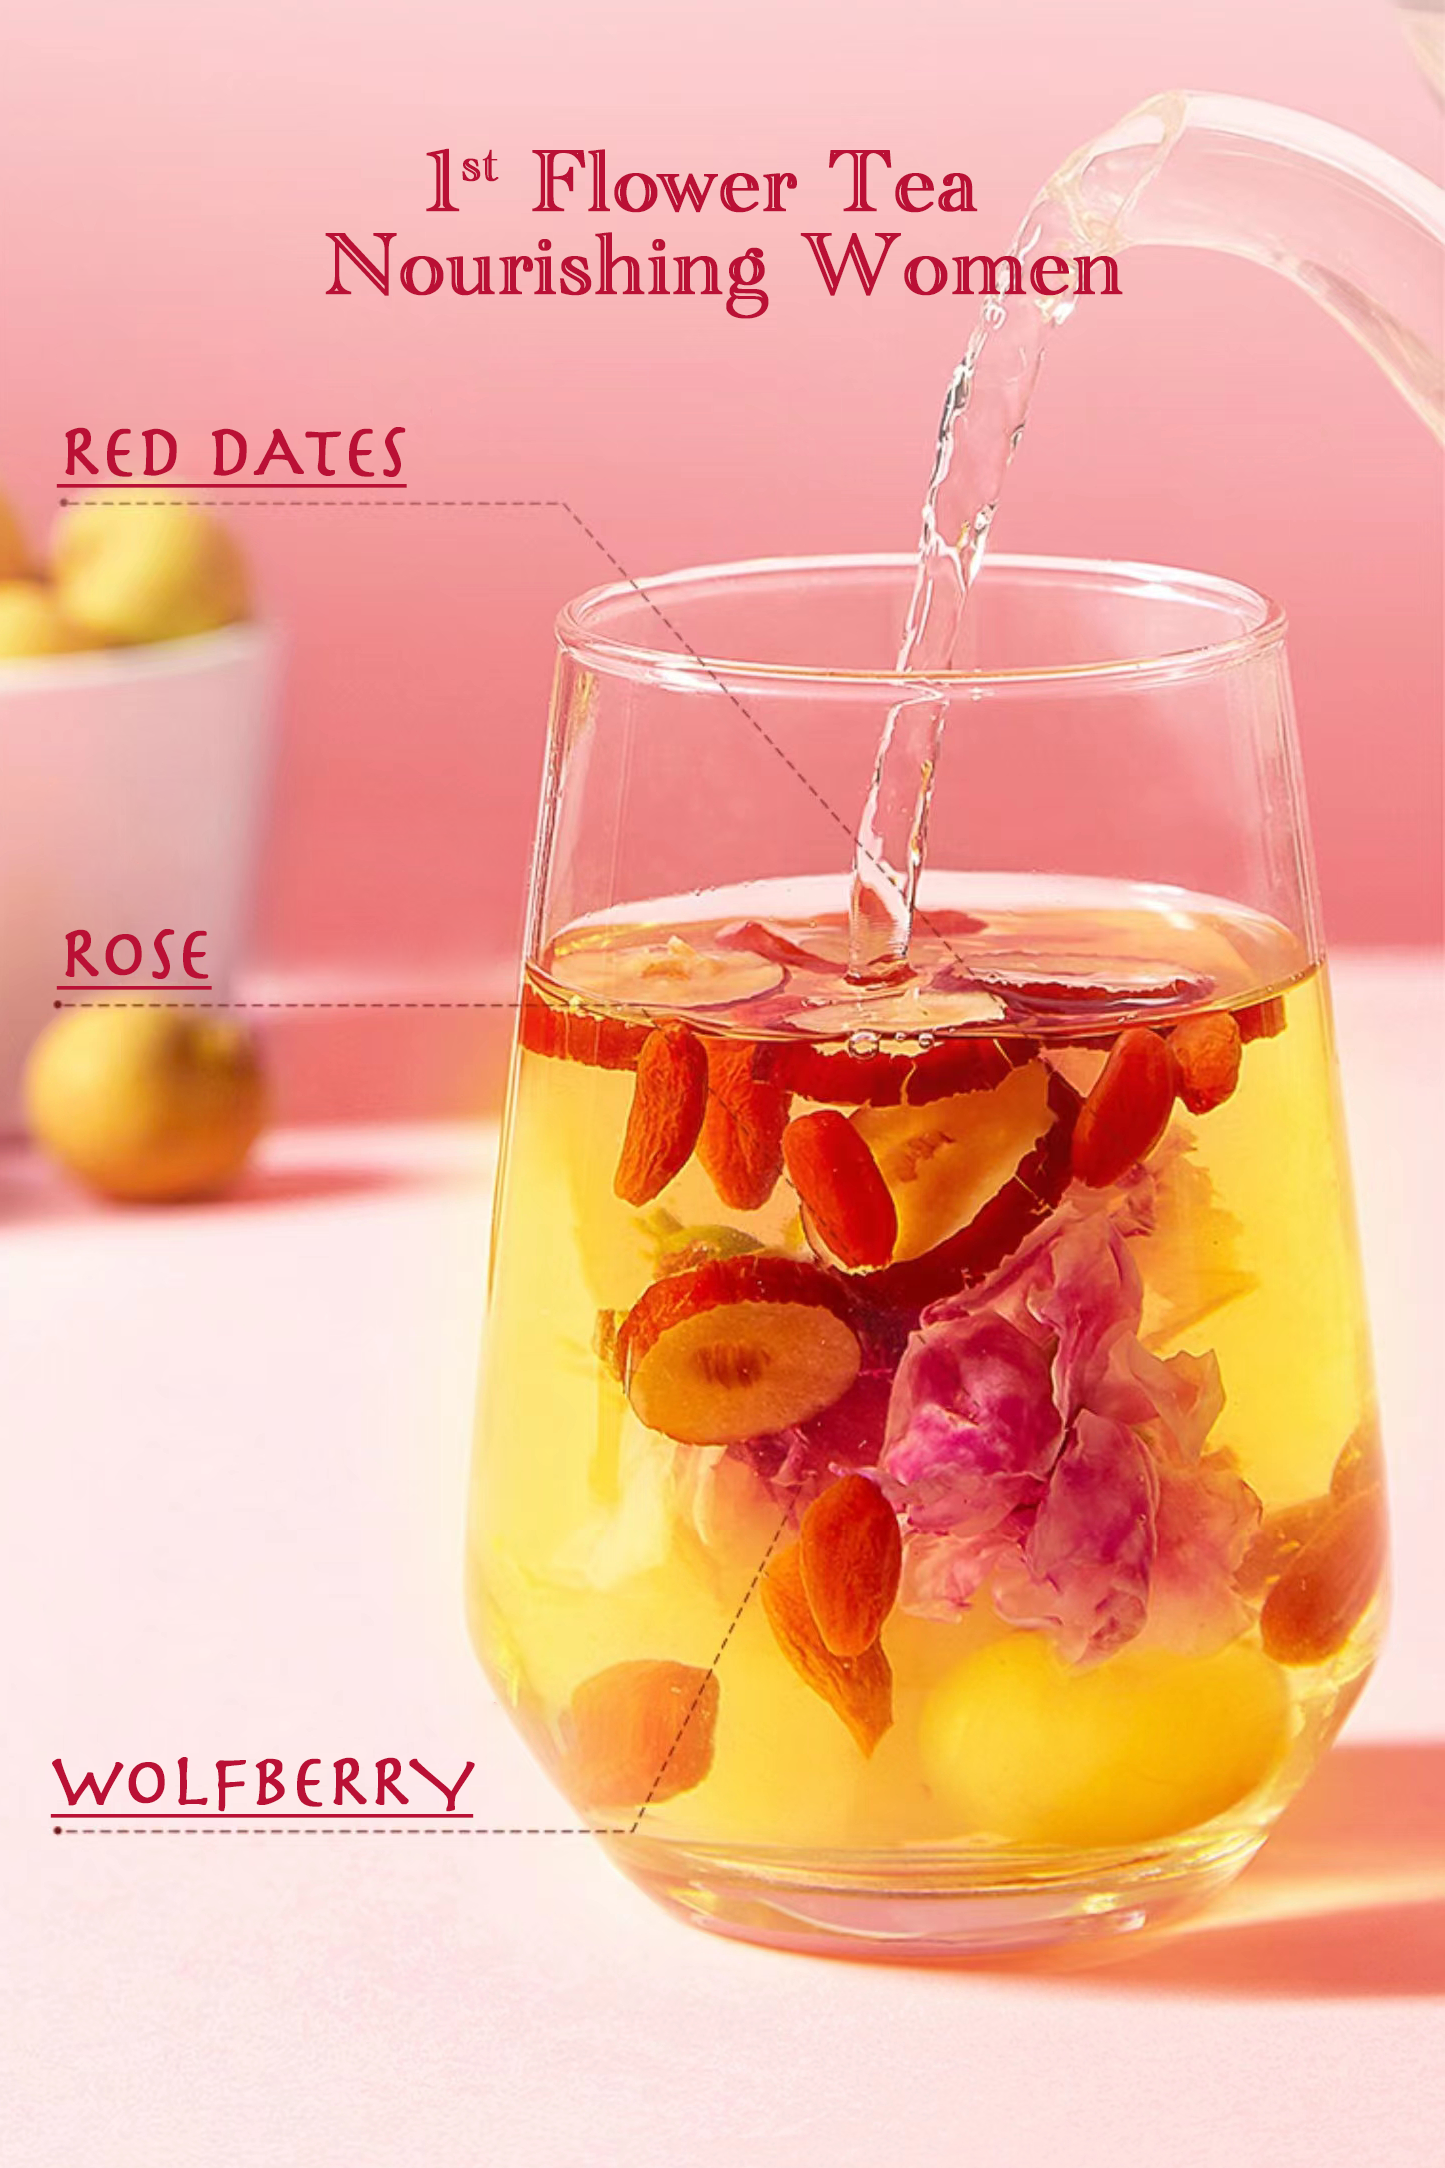 A glass teapot is pouring hot water into a glass filled with roses, dates and wolfberries,making flower tea,pink background